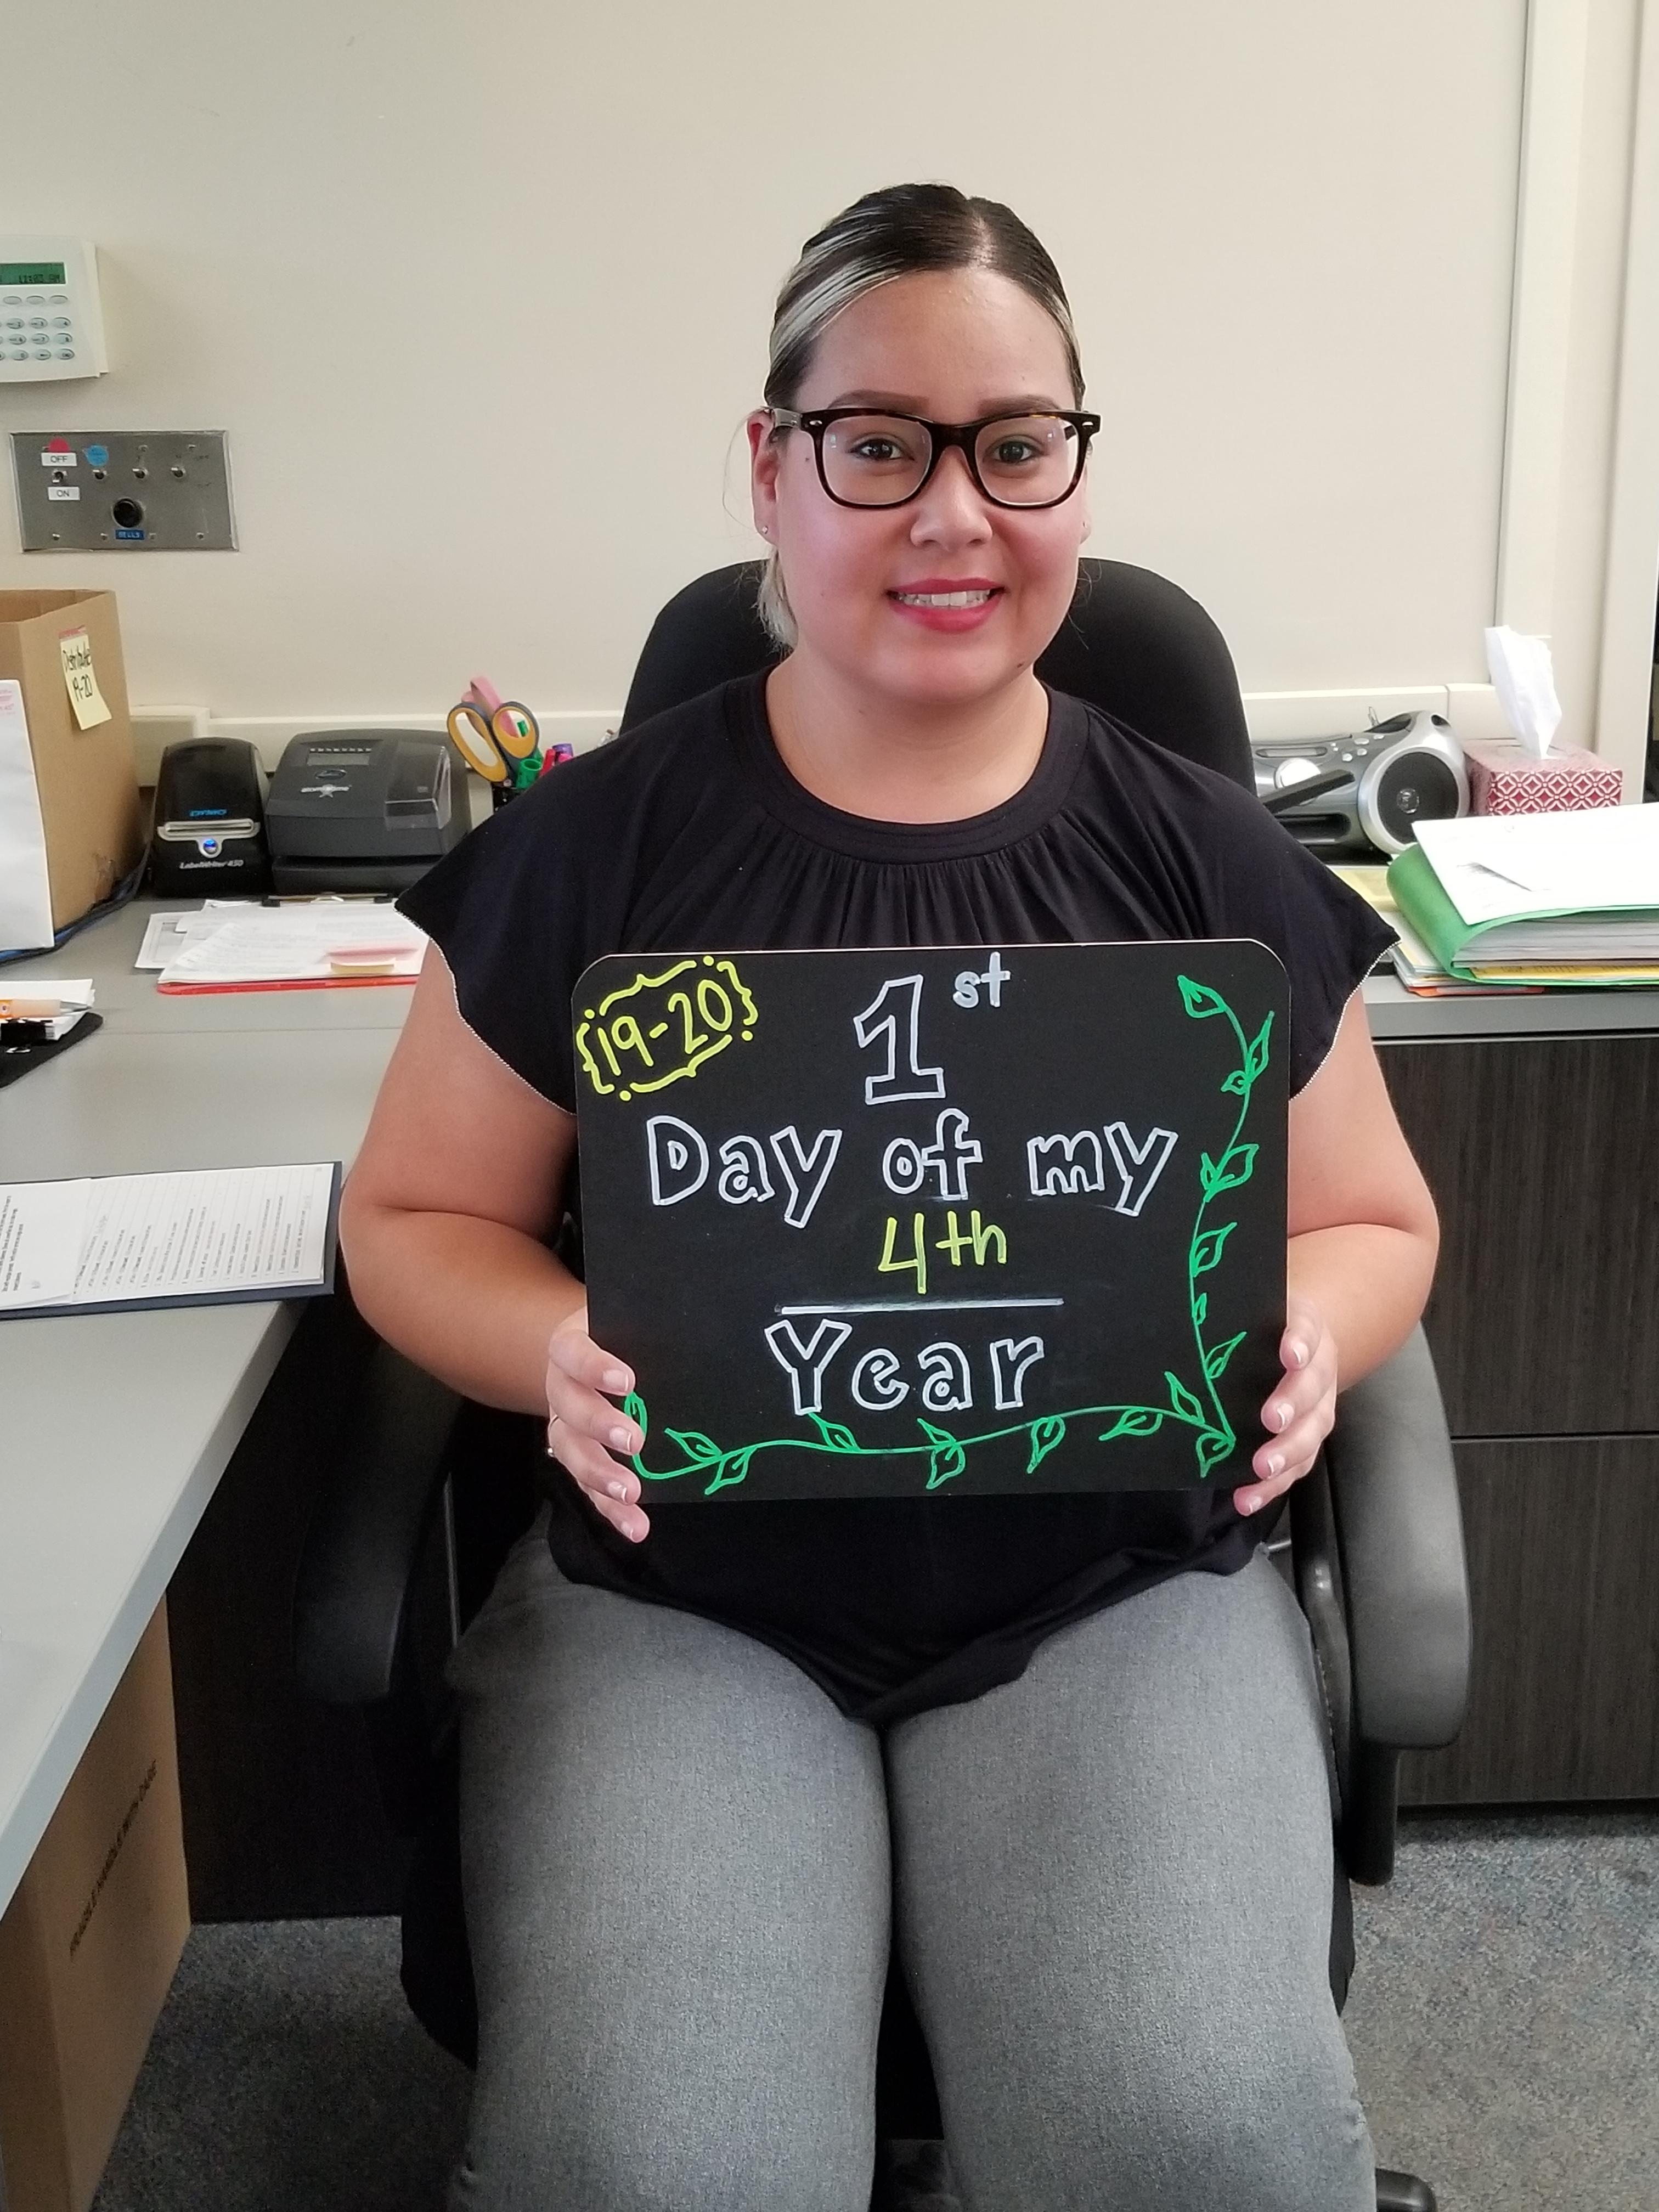 Ms. Genisis Escareno joined PUSD in 2016-17 as a College Tutor at Allison Elementary.  Now she has joined the Allison Team as the new Attendance Clerk.  Congratulations, Genisis! #proud2bepusd